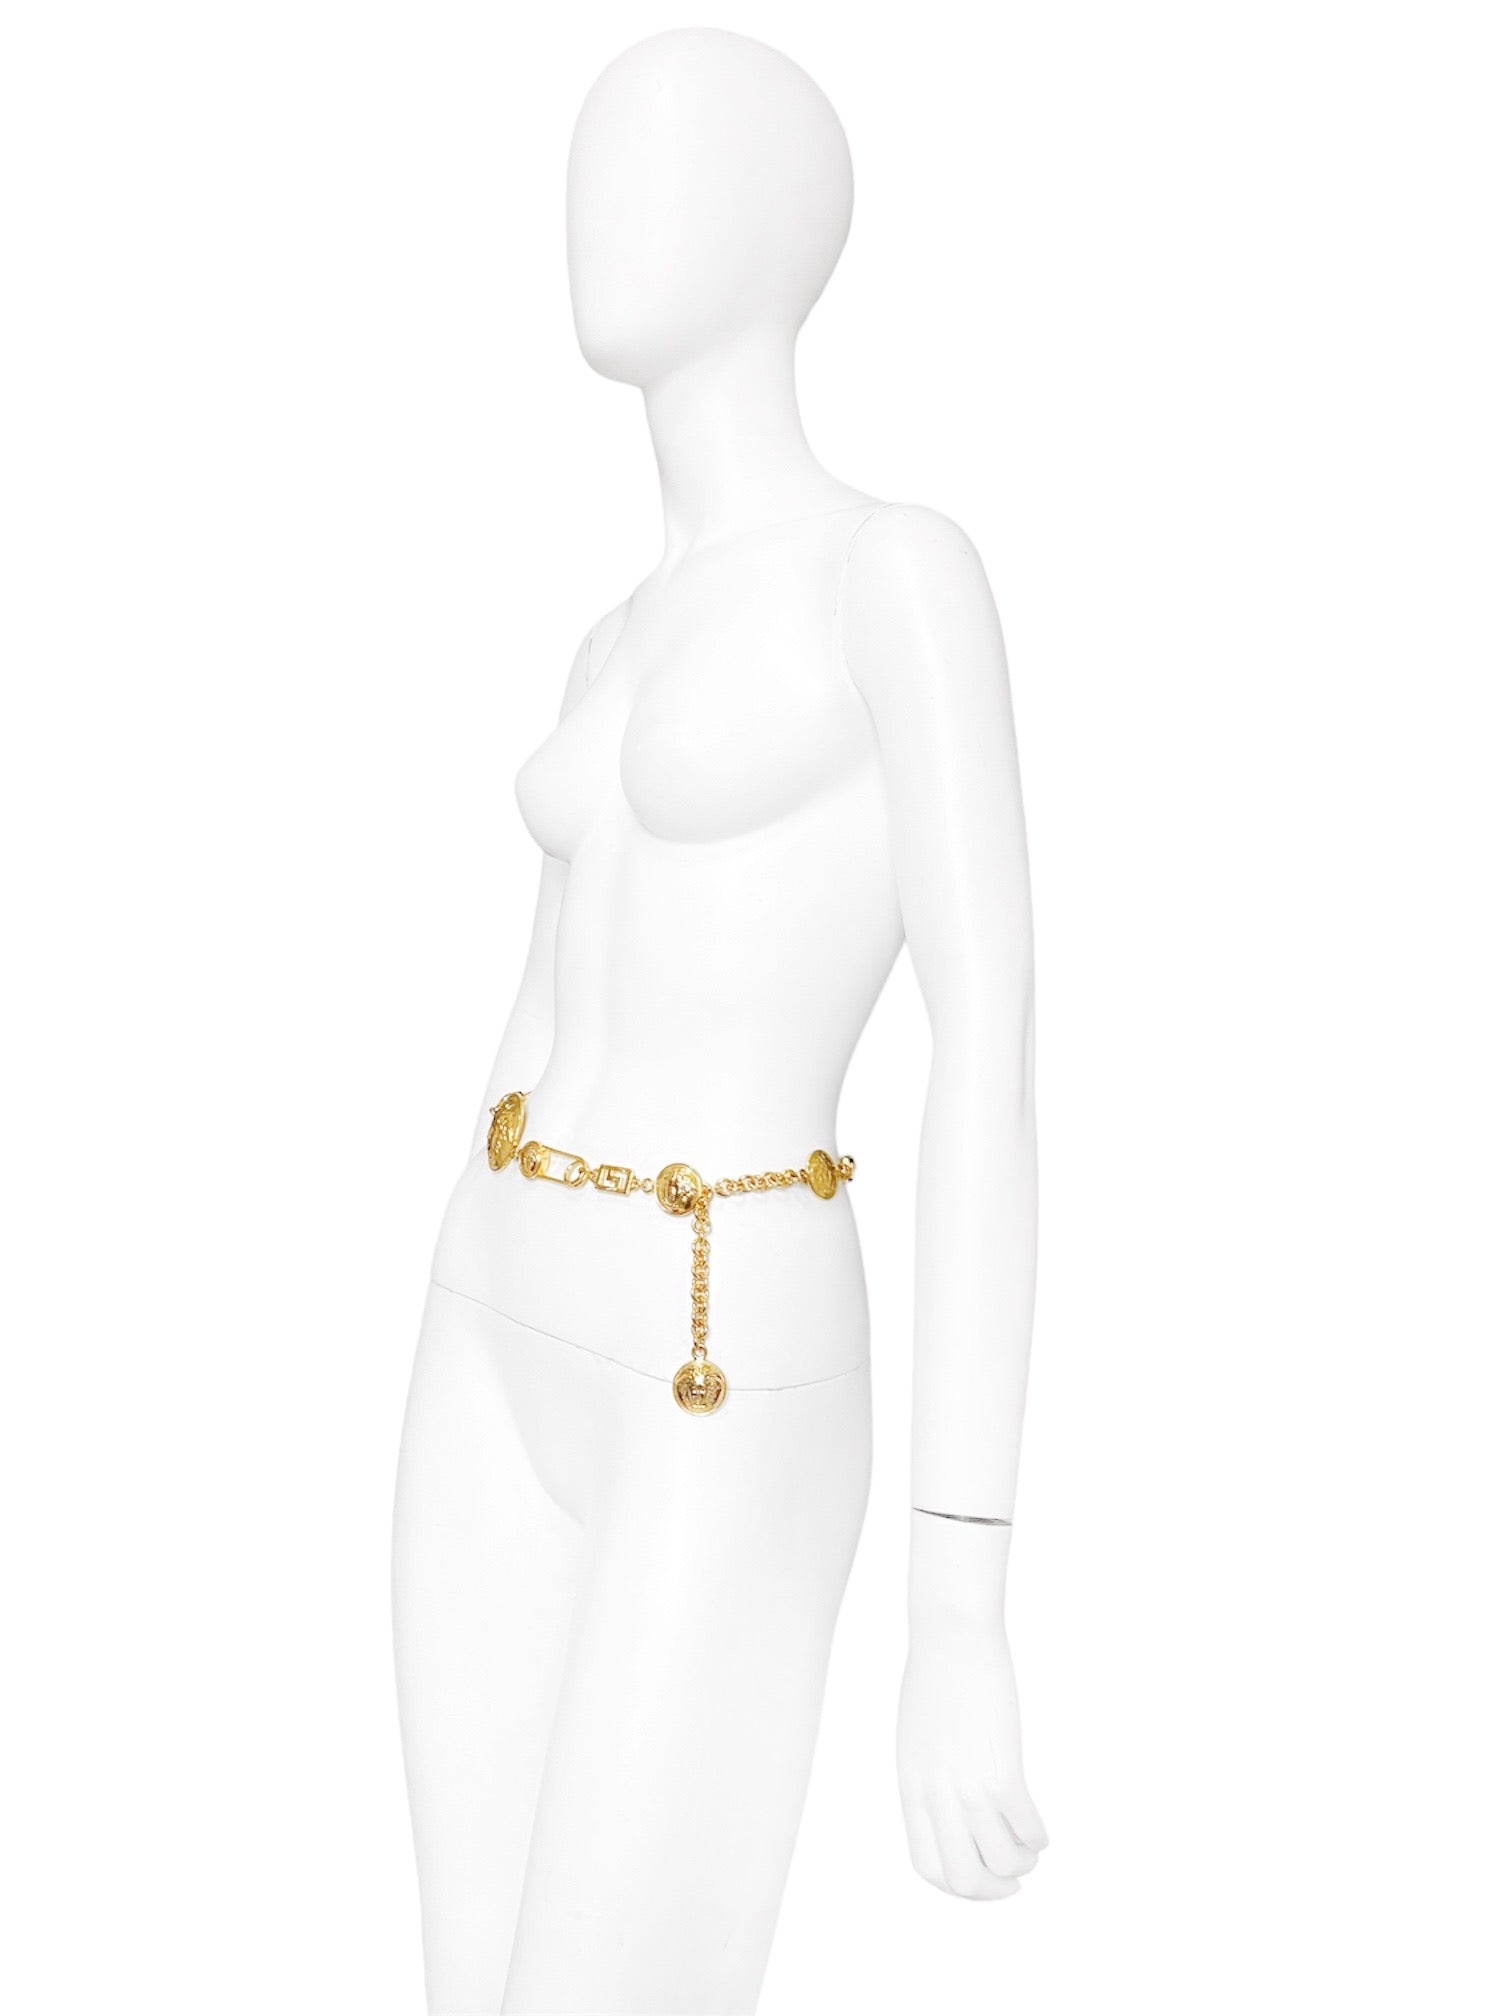 Gianni Versace Iconic Spring 1994 Gold Safety Pin Chain Belt - 9